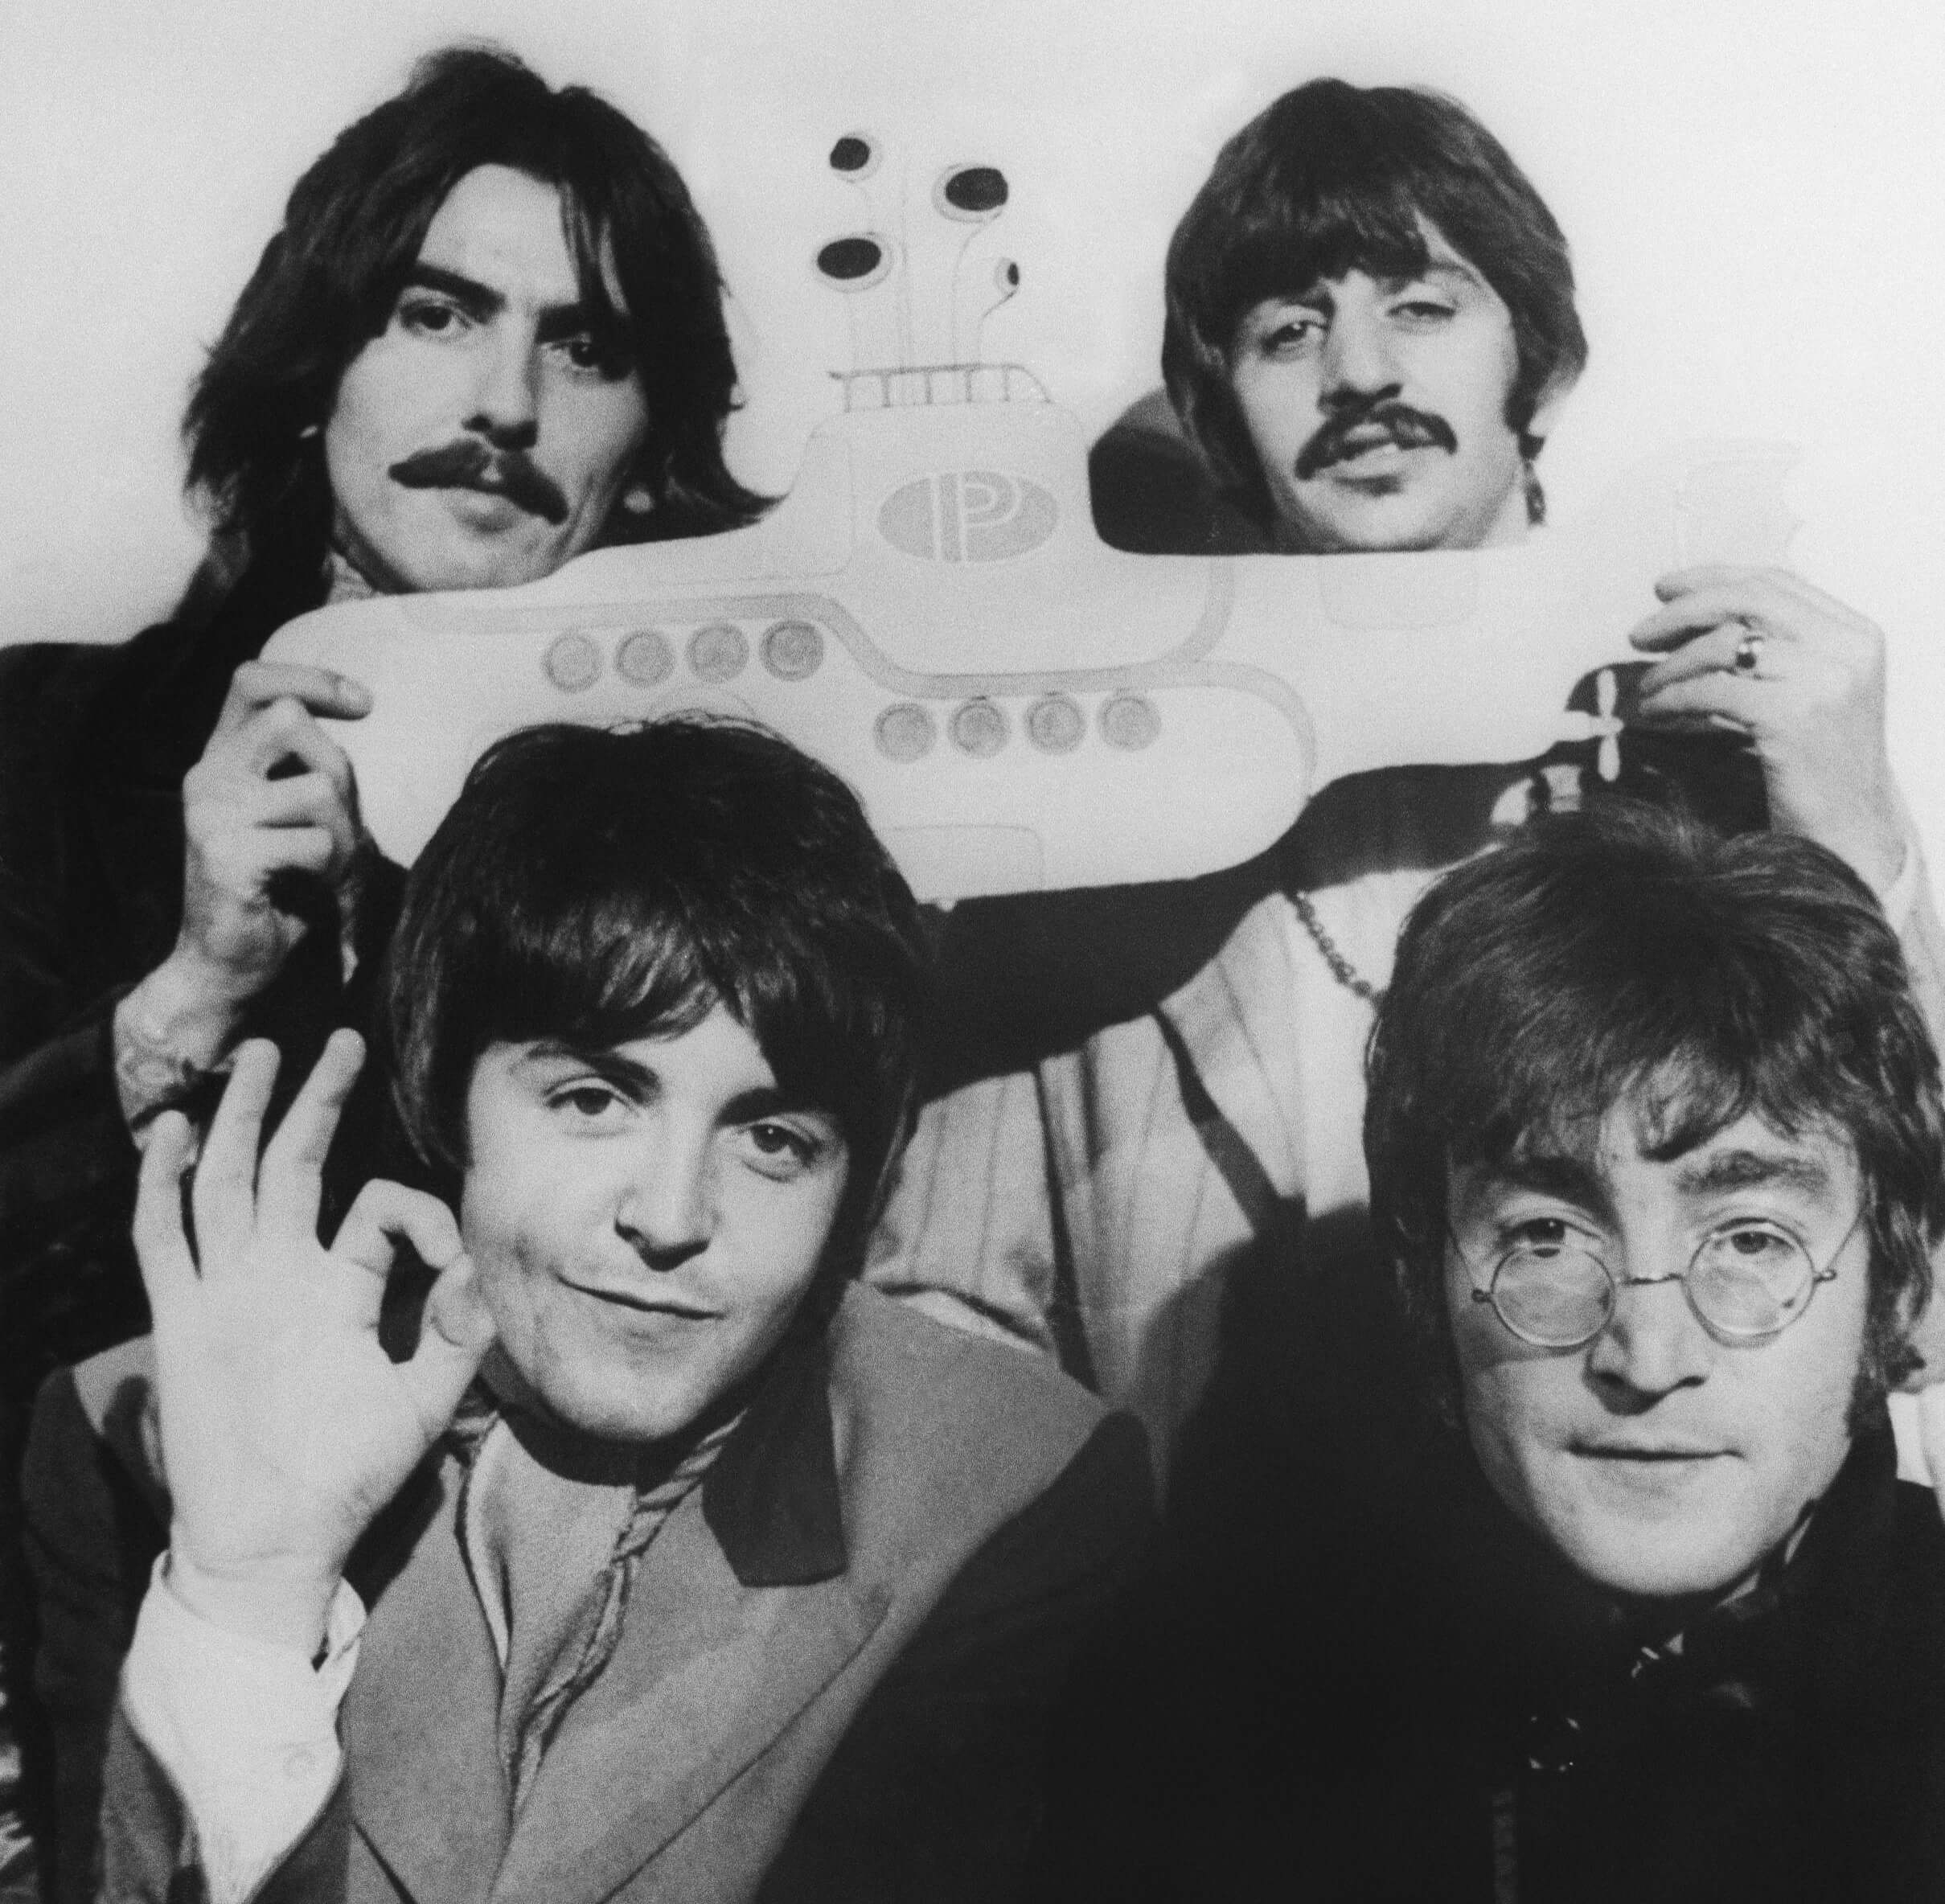 The Beatles with a yellow submarine in black-and-white